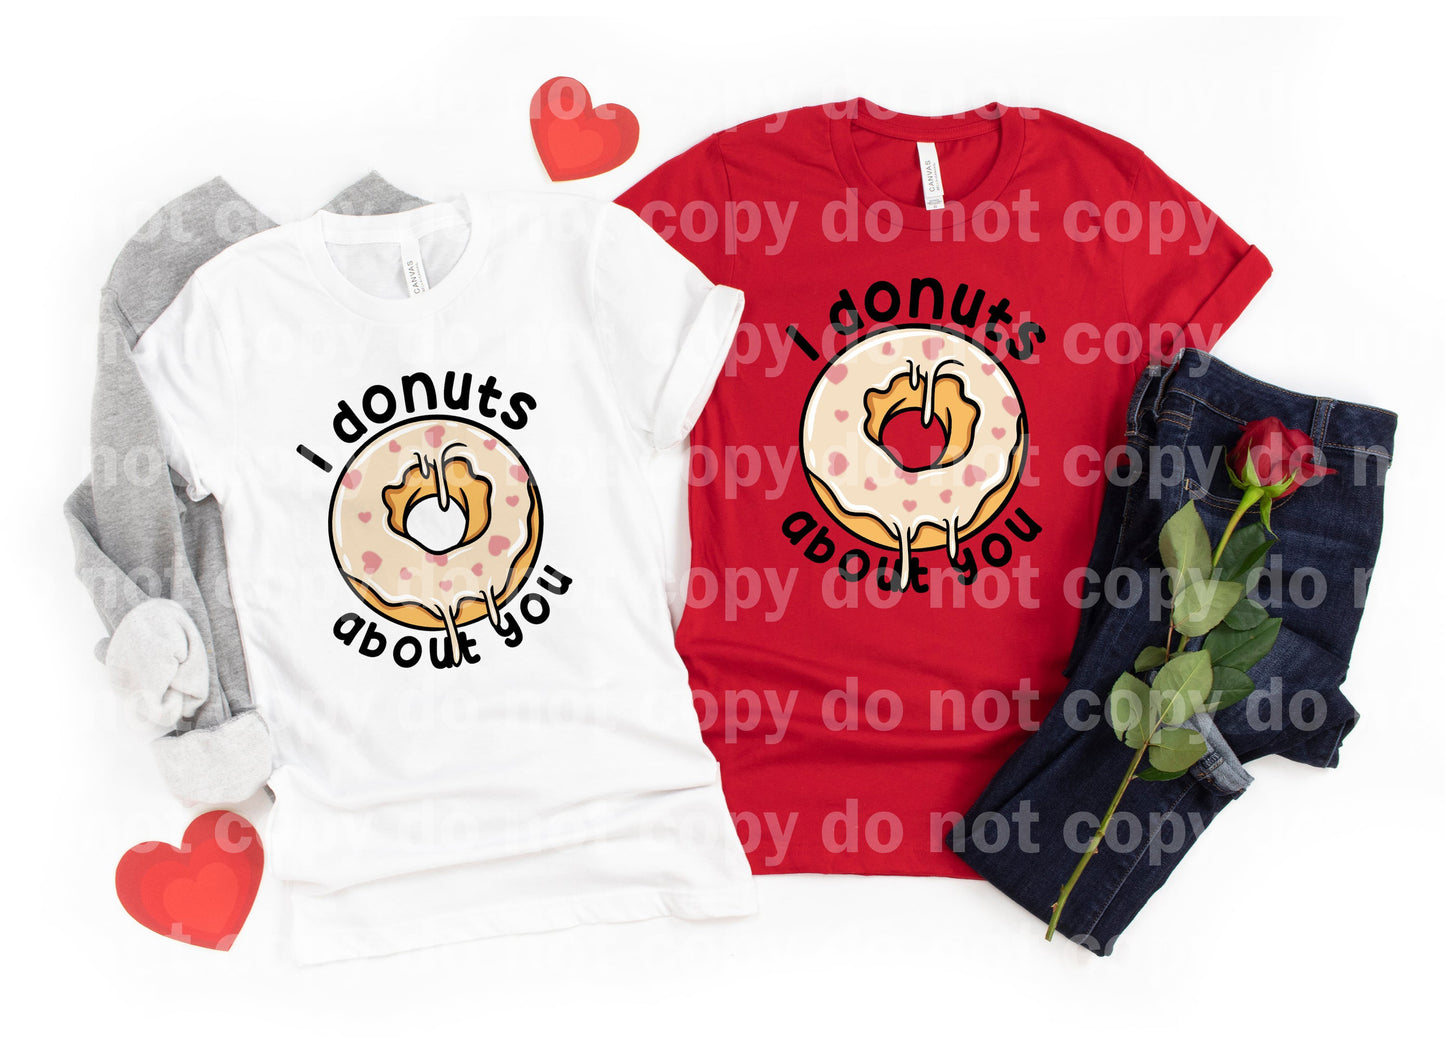 I Donuts About You Beige/Black/Pink Dream Print or Sublimation Print